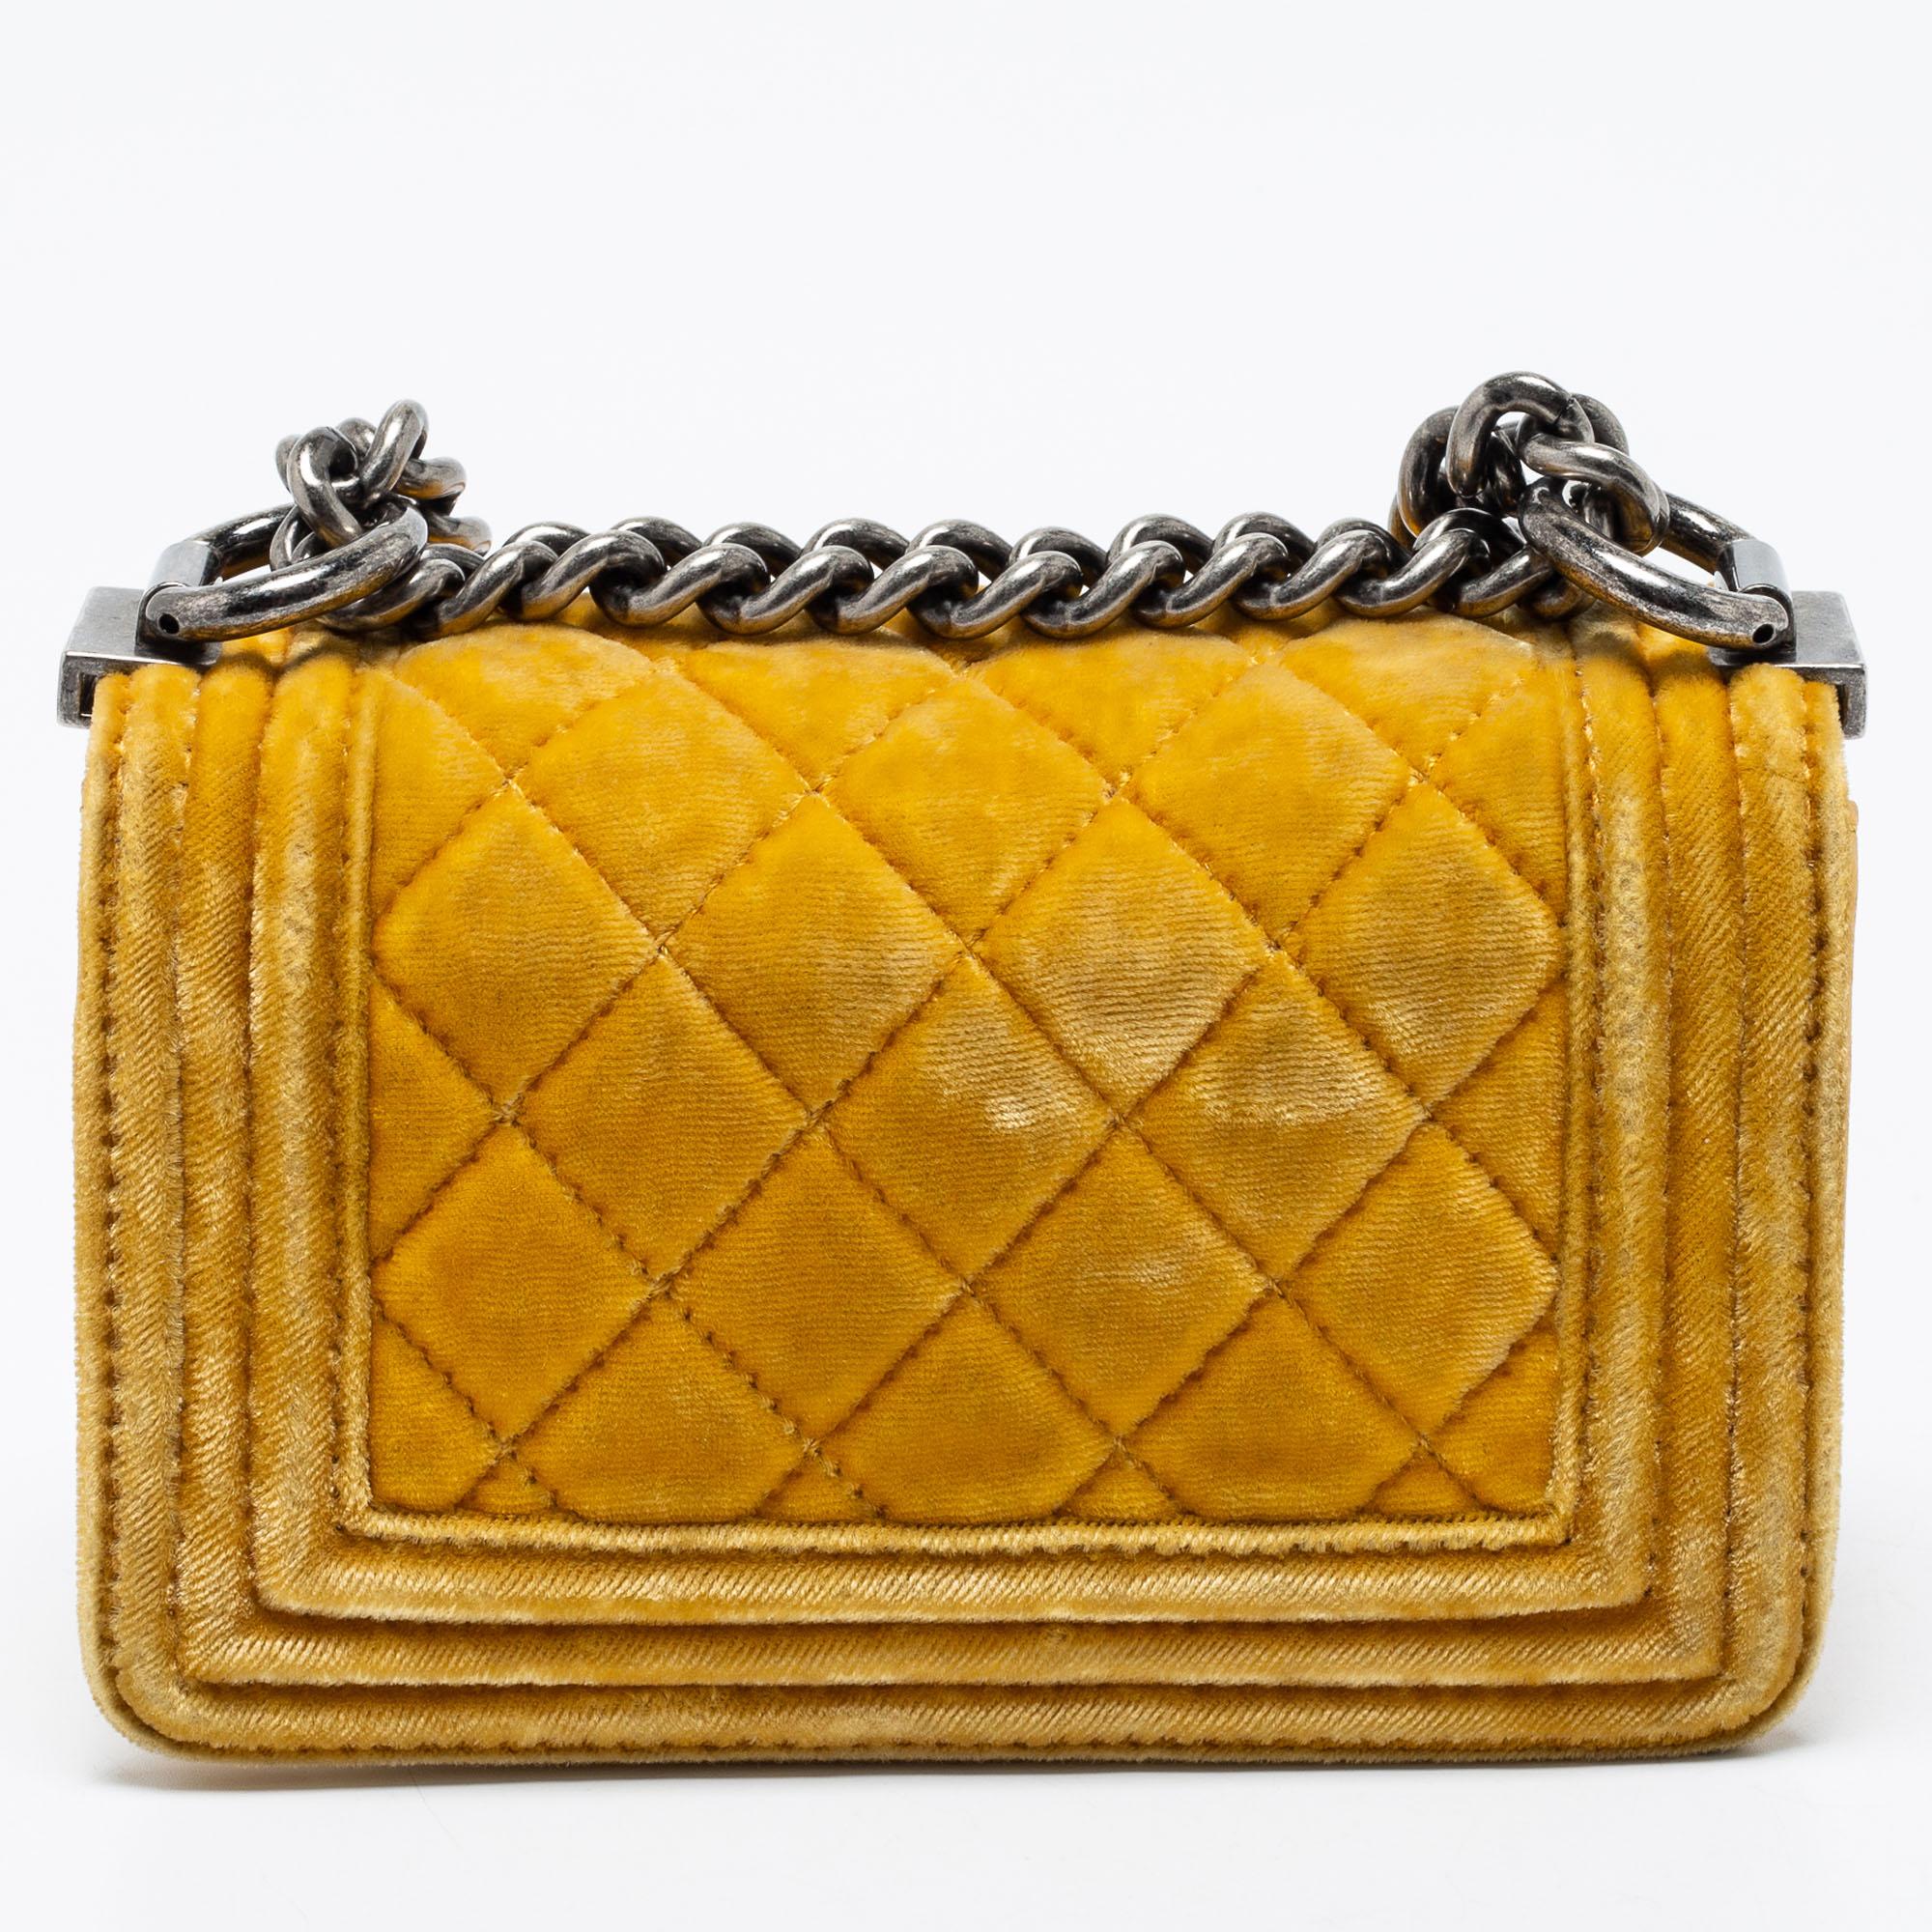 Introduced as a part of the Chanel Fall/Winter collection of 2011, the Boy flap bag is alluring and complemented with exquisite details. This yellow creation is meticulously crafted from quilted velvet and features side paneling, a chain-leather